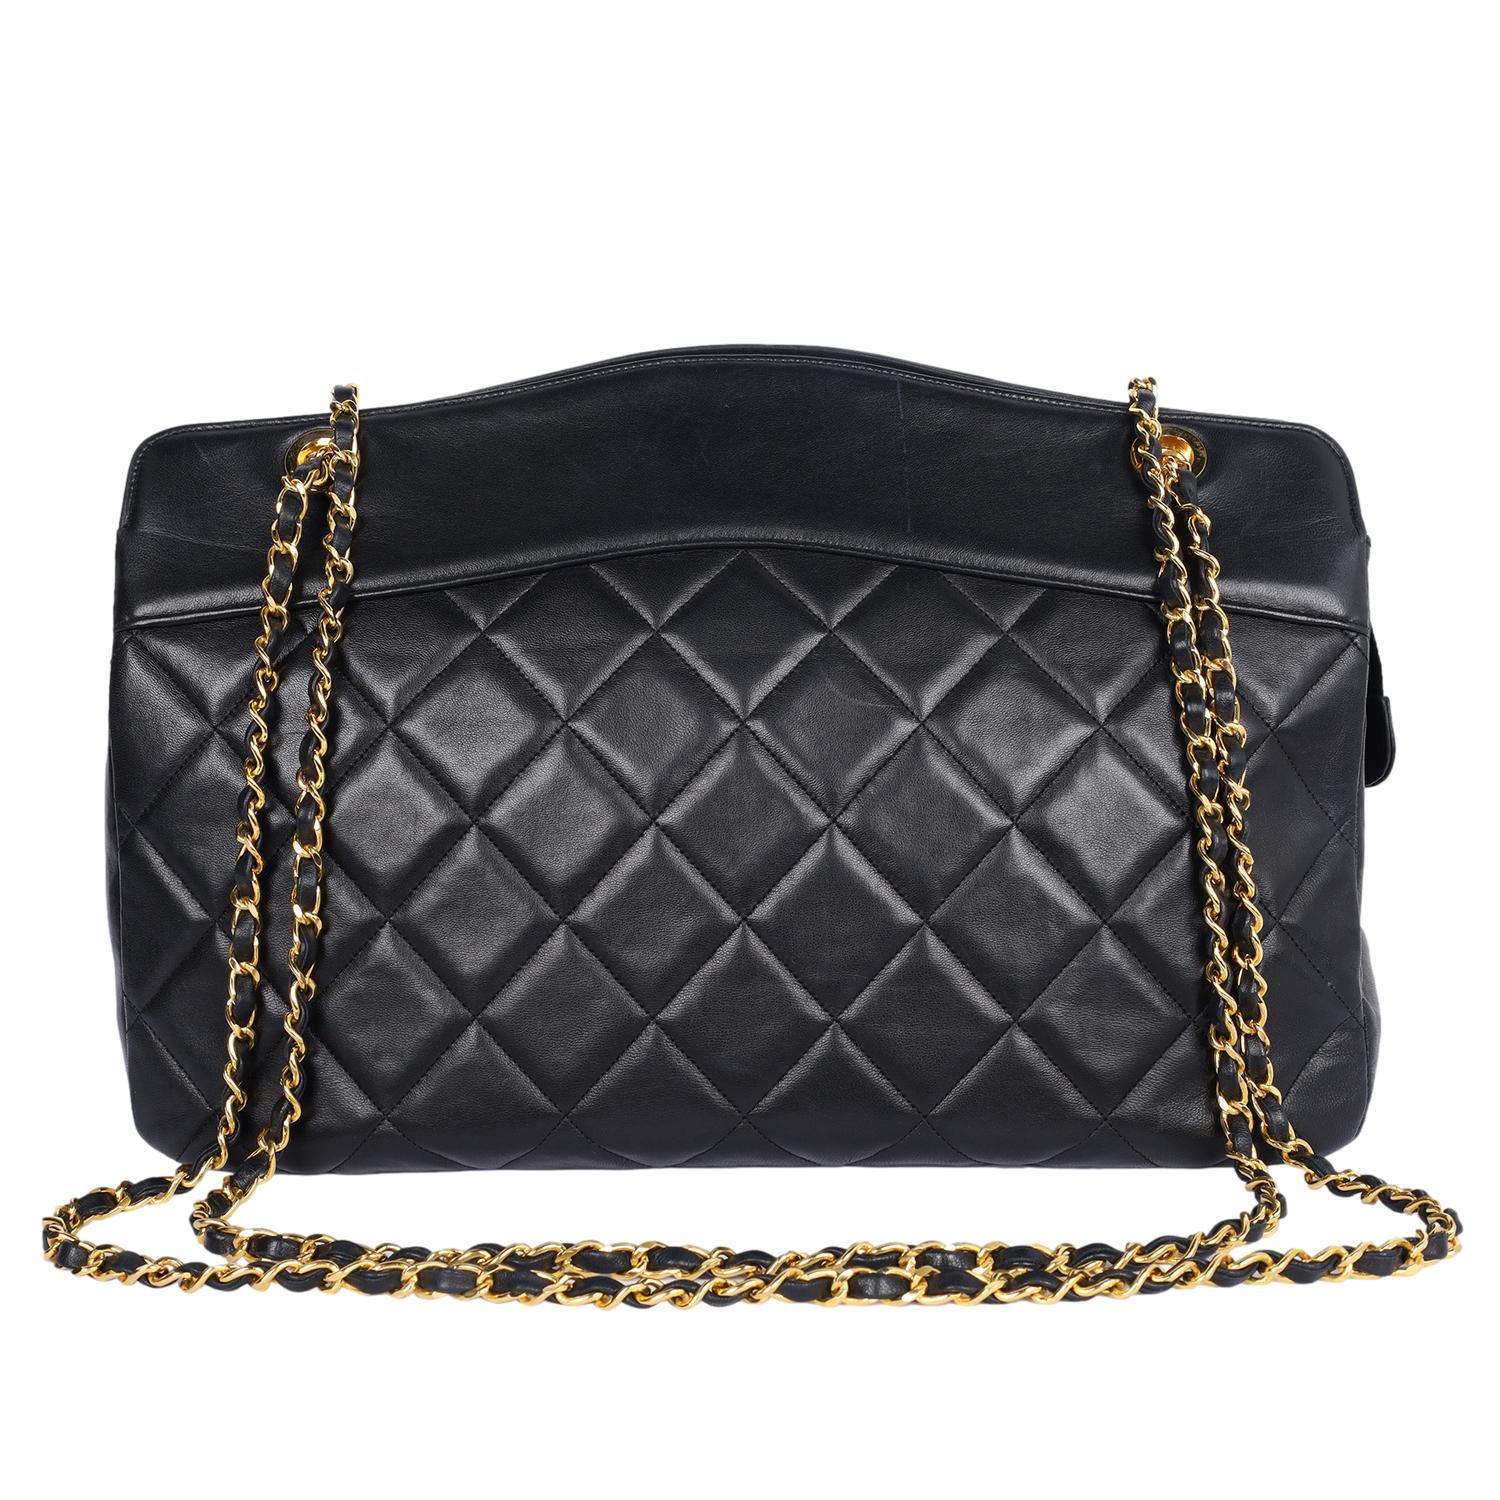 Chanel Black Quilted Lambskin Leather Crossbody Bag 1989 For Sale 4